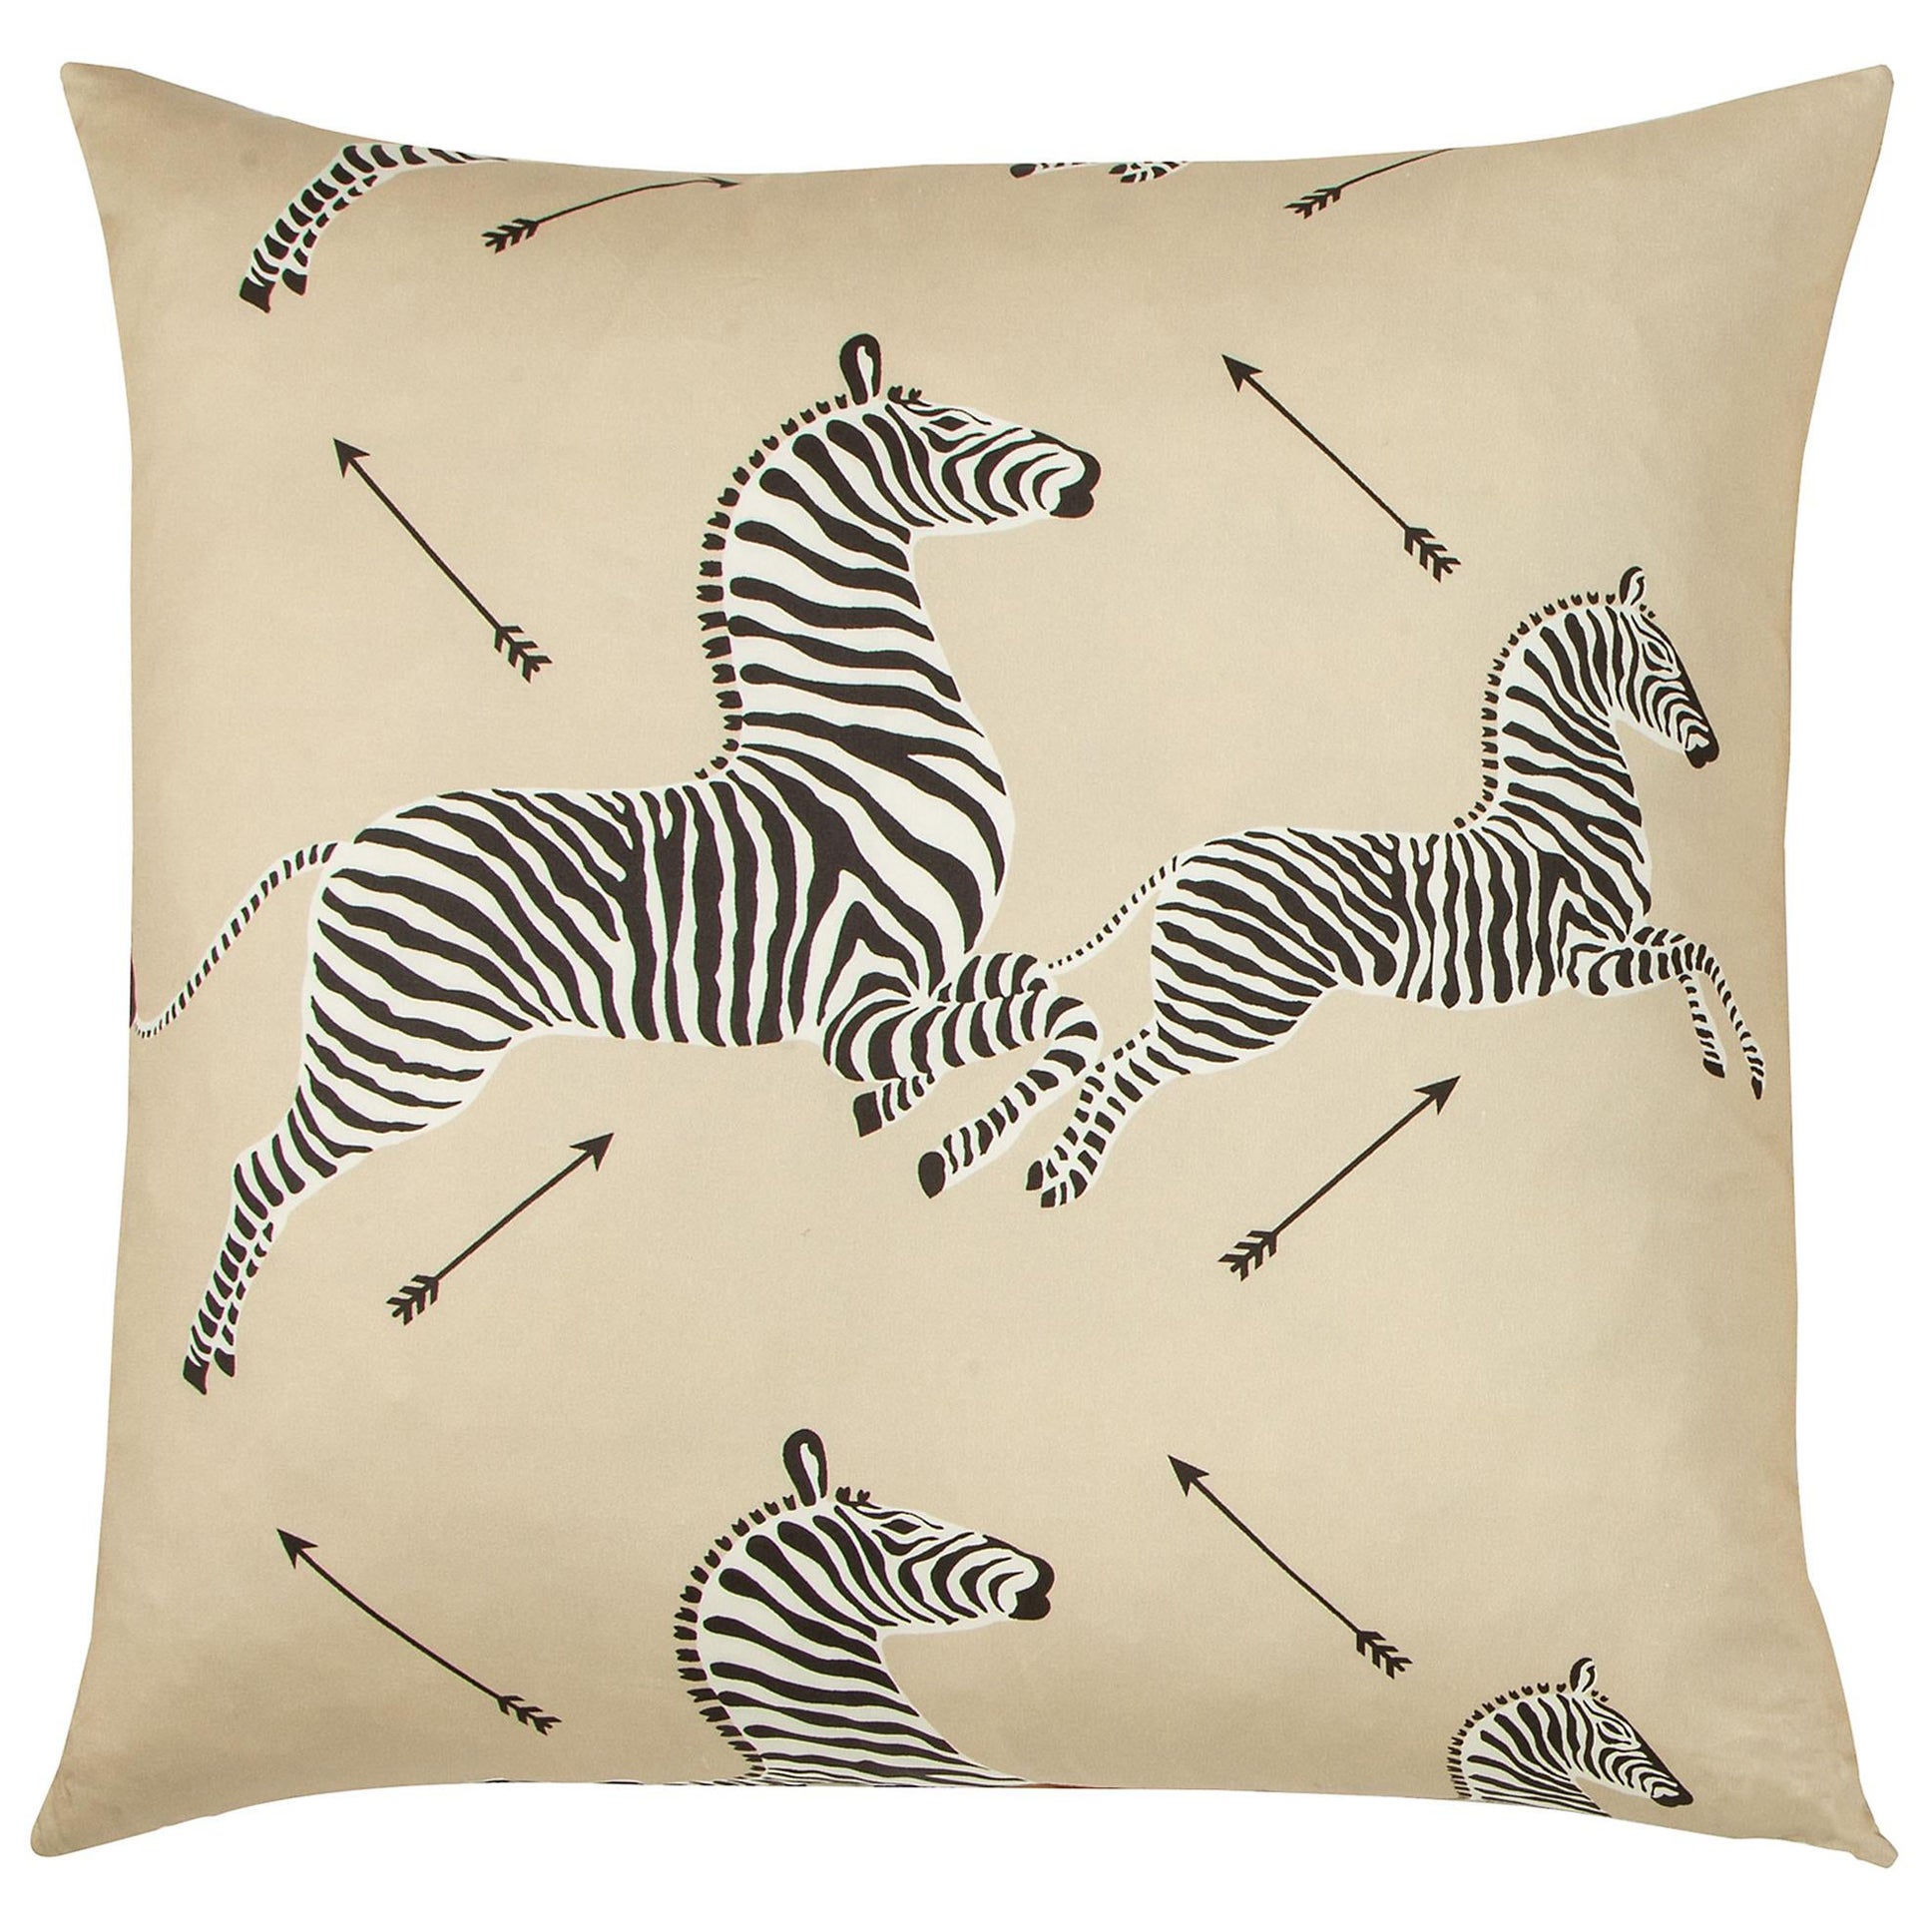 Dazzle Of Zebras Pillow For Sale